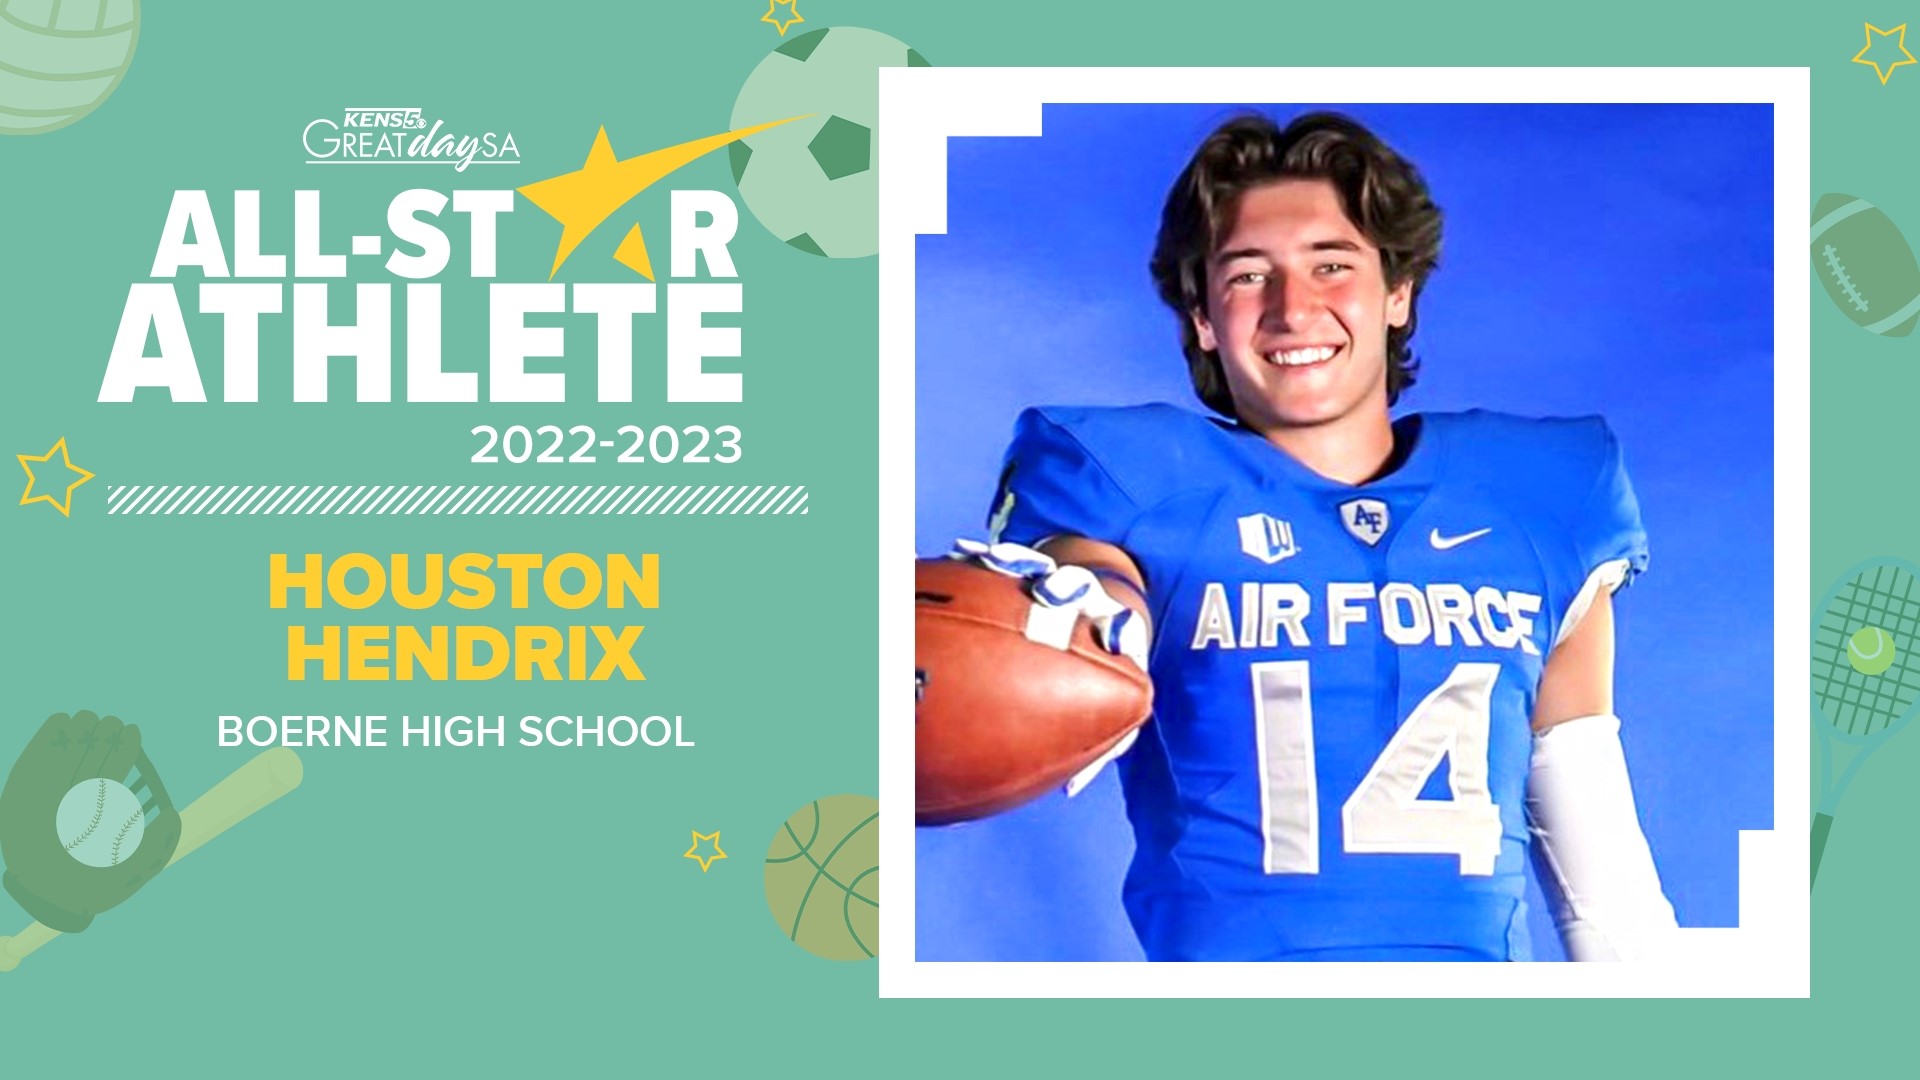 Boerne High School football player Houston Hendrix receives this week's All-Star Athlete award, which is sponsored by The UPS Store.